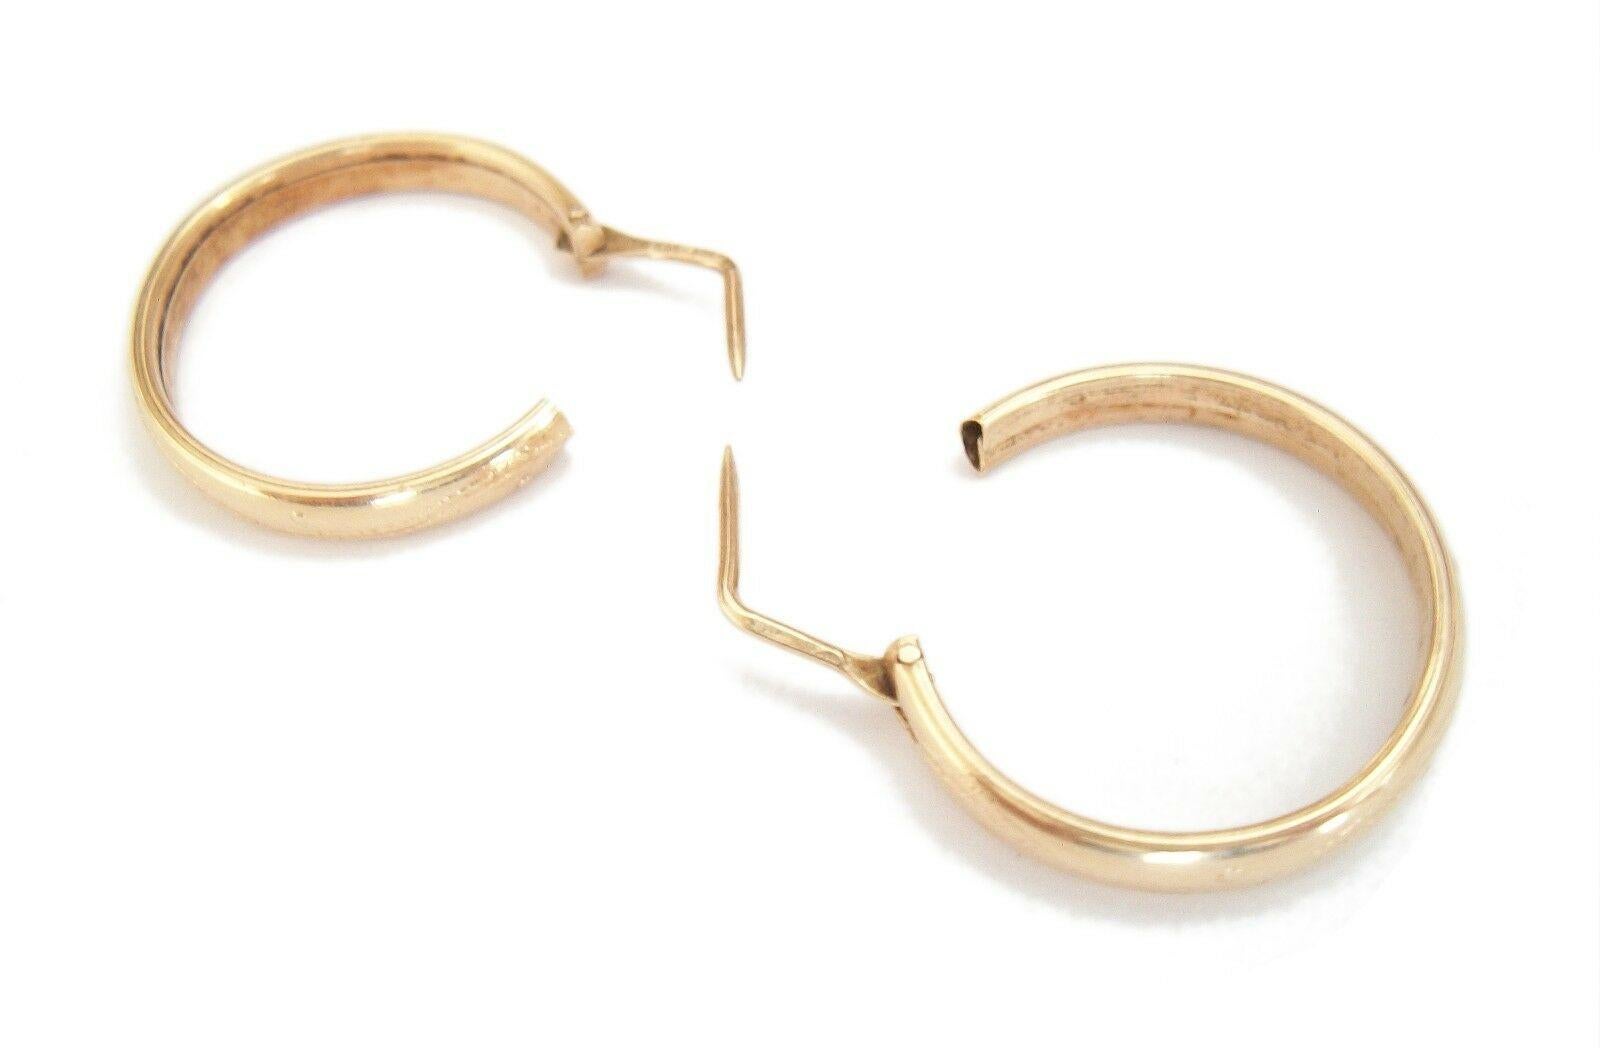 Vintage Vicenza 14K Gold Hoop Earrings, Hand Made, Italy, Mid 20th Century In Good Condition For Sale In Chatham, CA